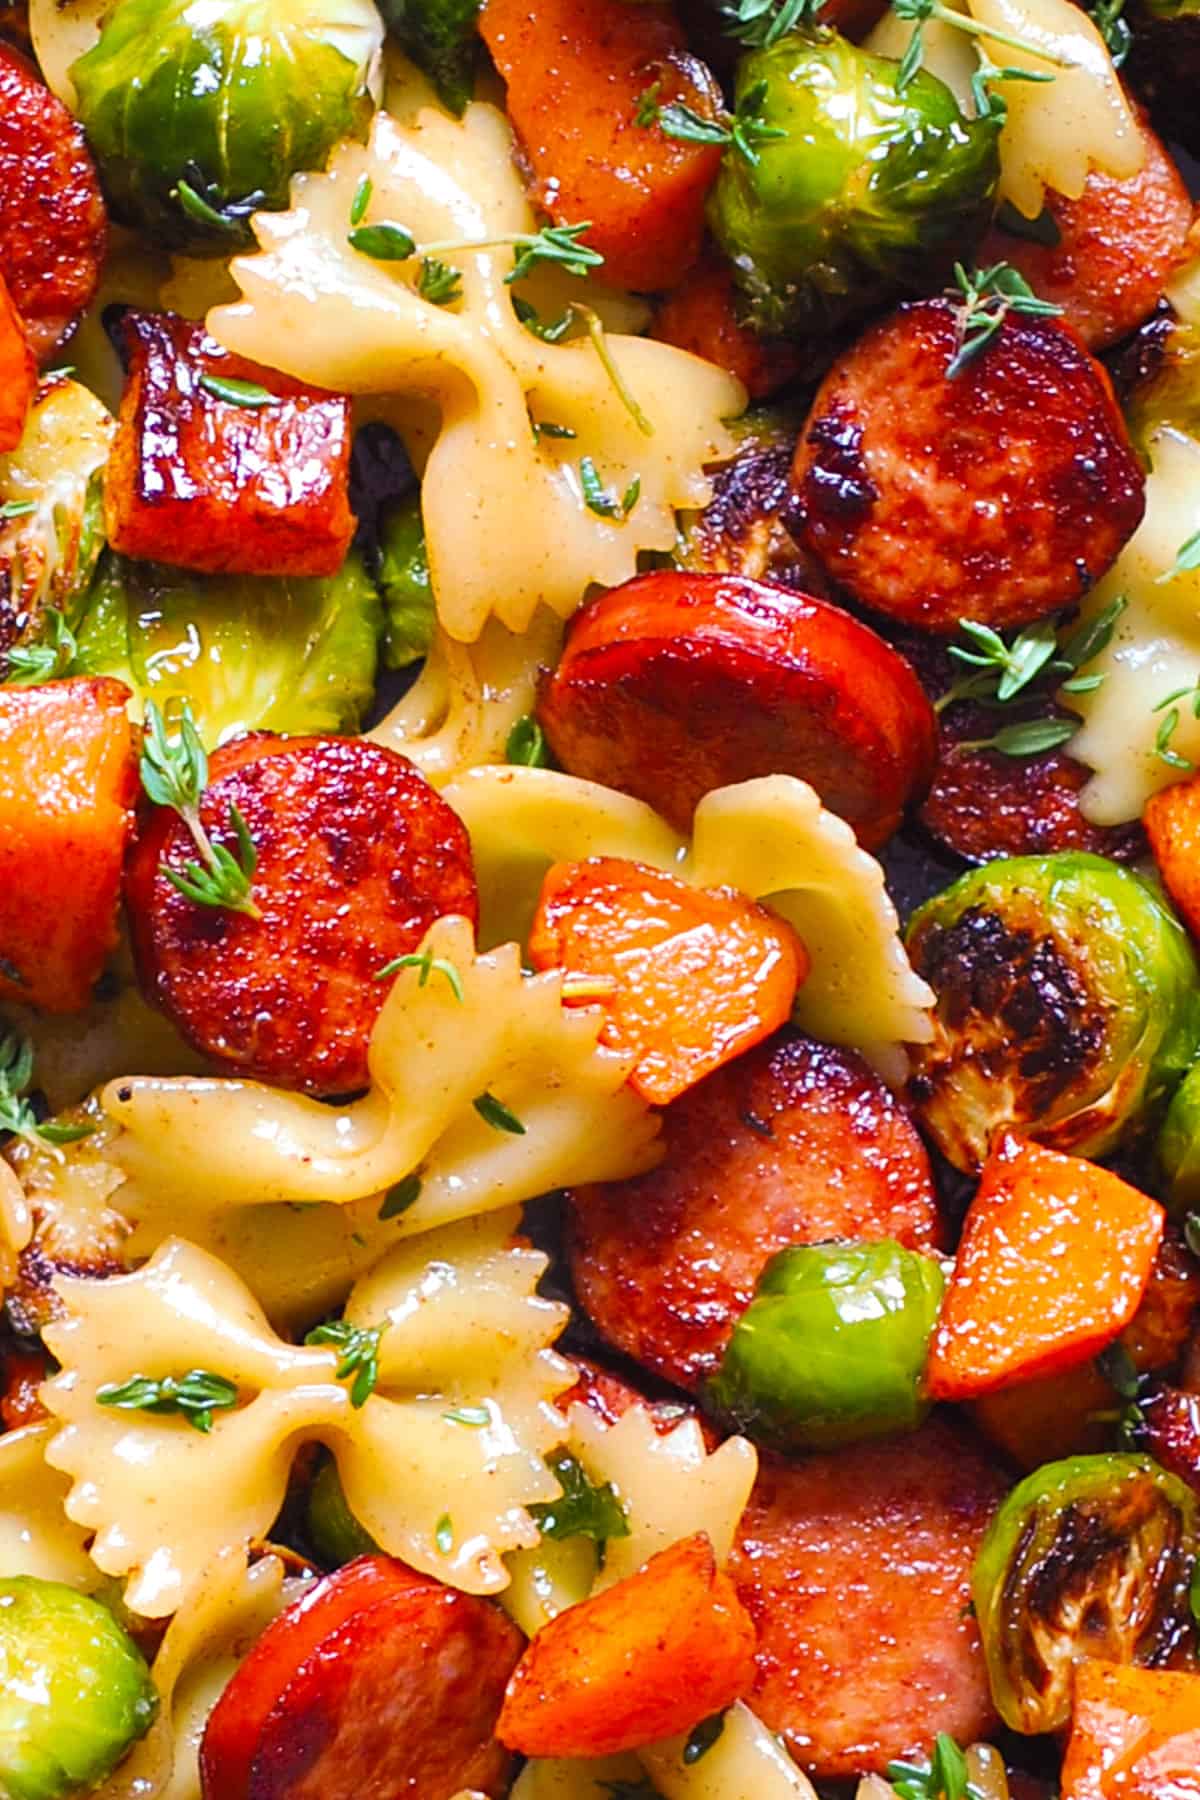 Autumn Dinner with Sausage, Pasta, Veggies (Butternut Squash and Brussels sprouts) - close-up photo.